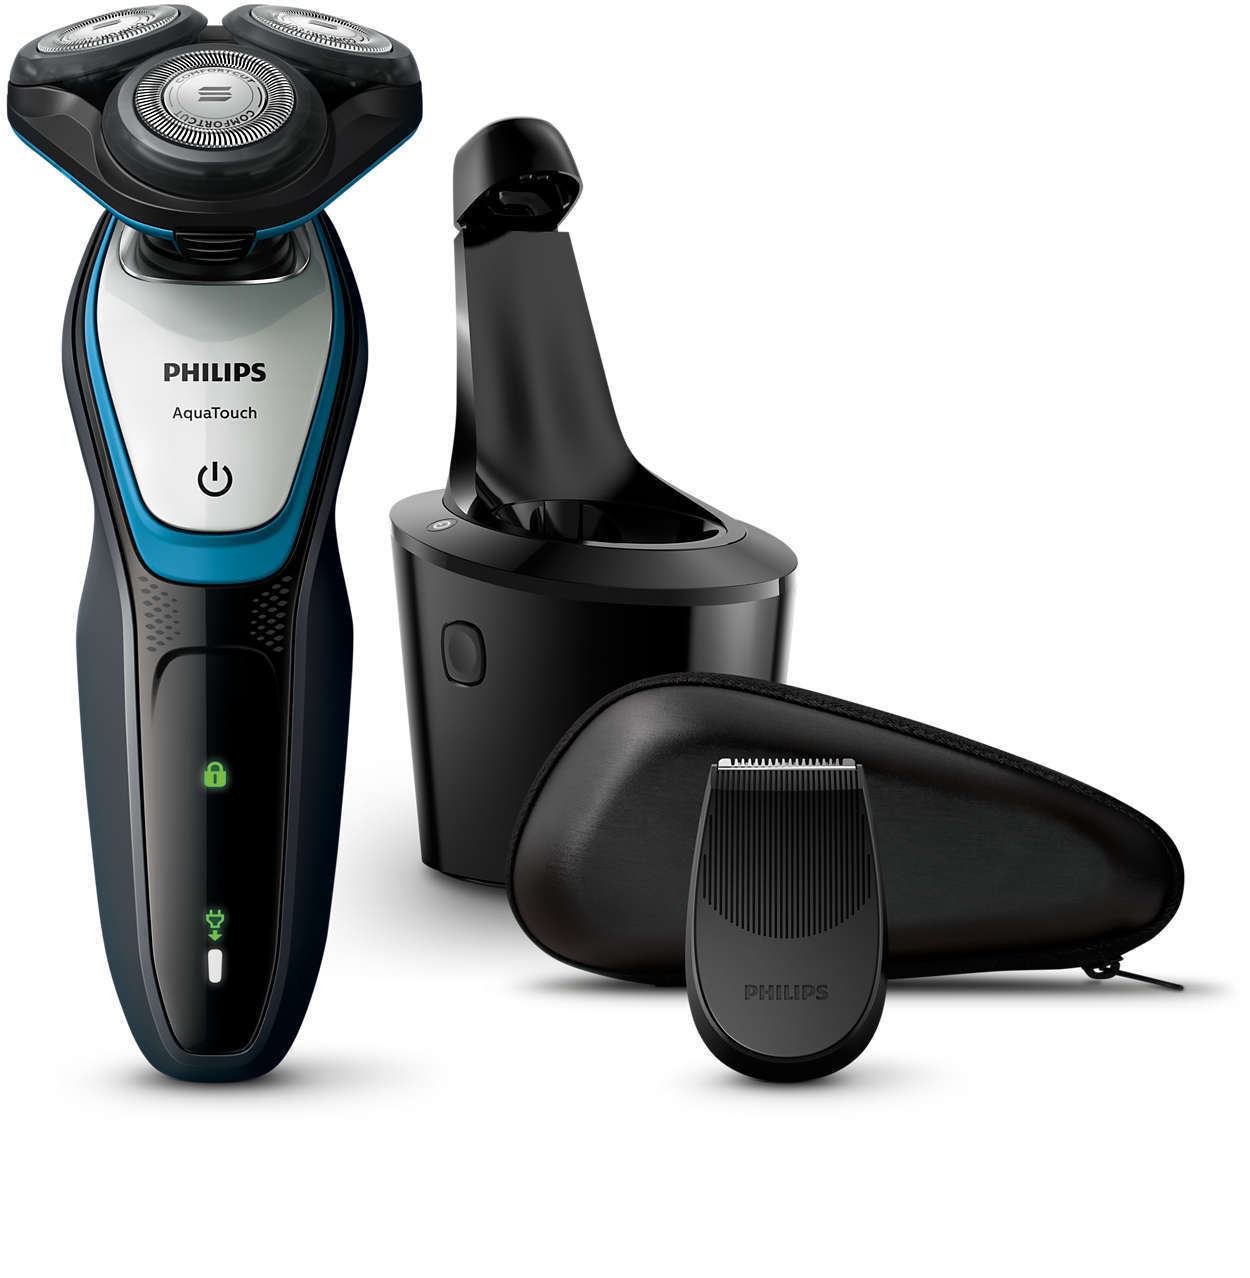 philips-aquatouch-s5070-electric-shaver-beautiful-online